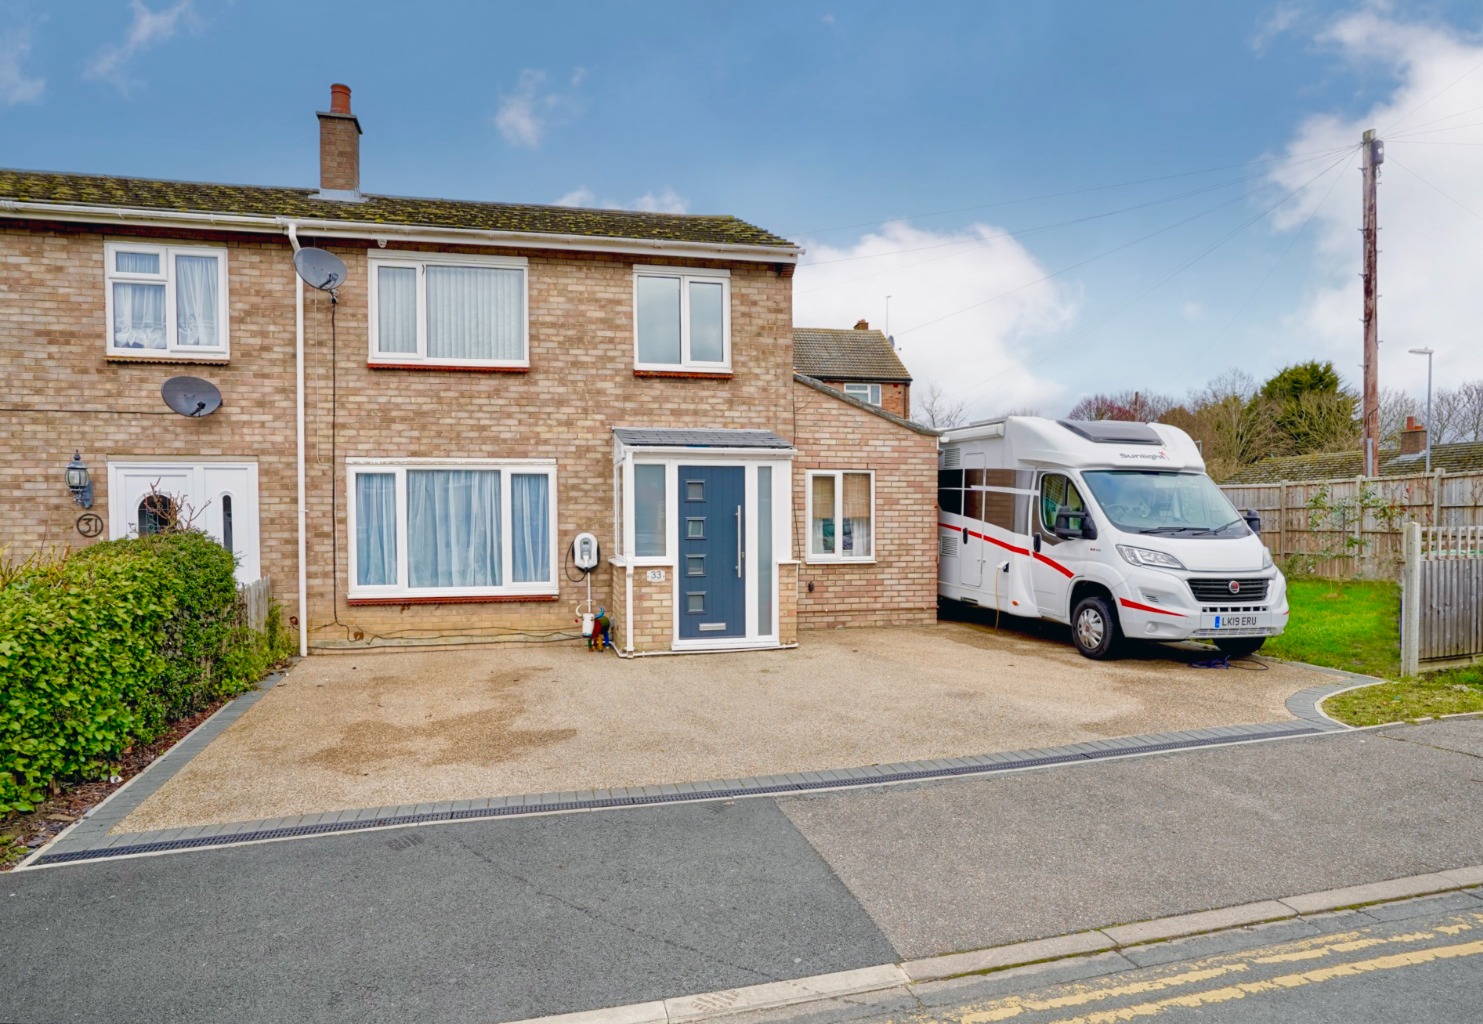 4 bed end of terrace house for sale in Childs Pond Road, St. Neots - Property Image 1